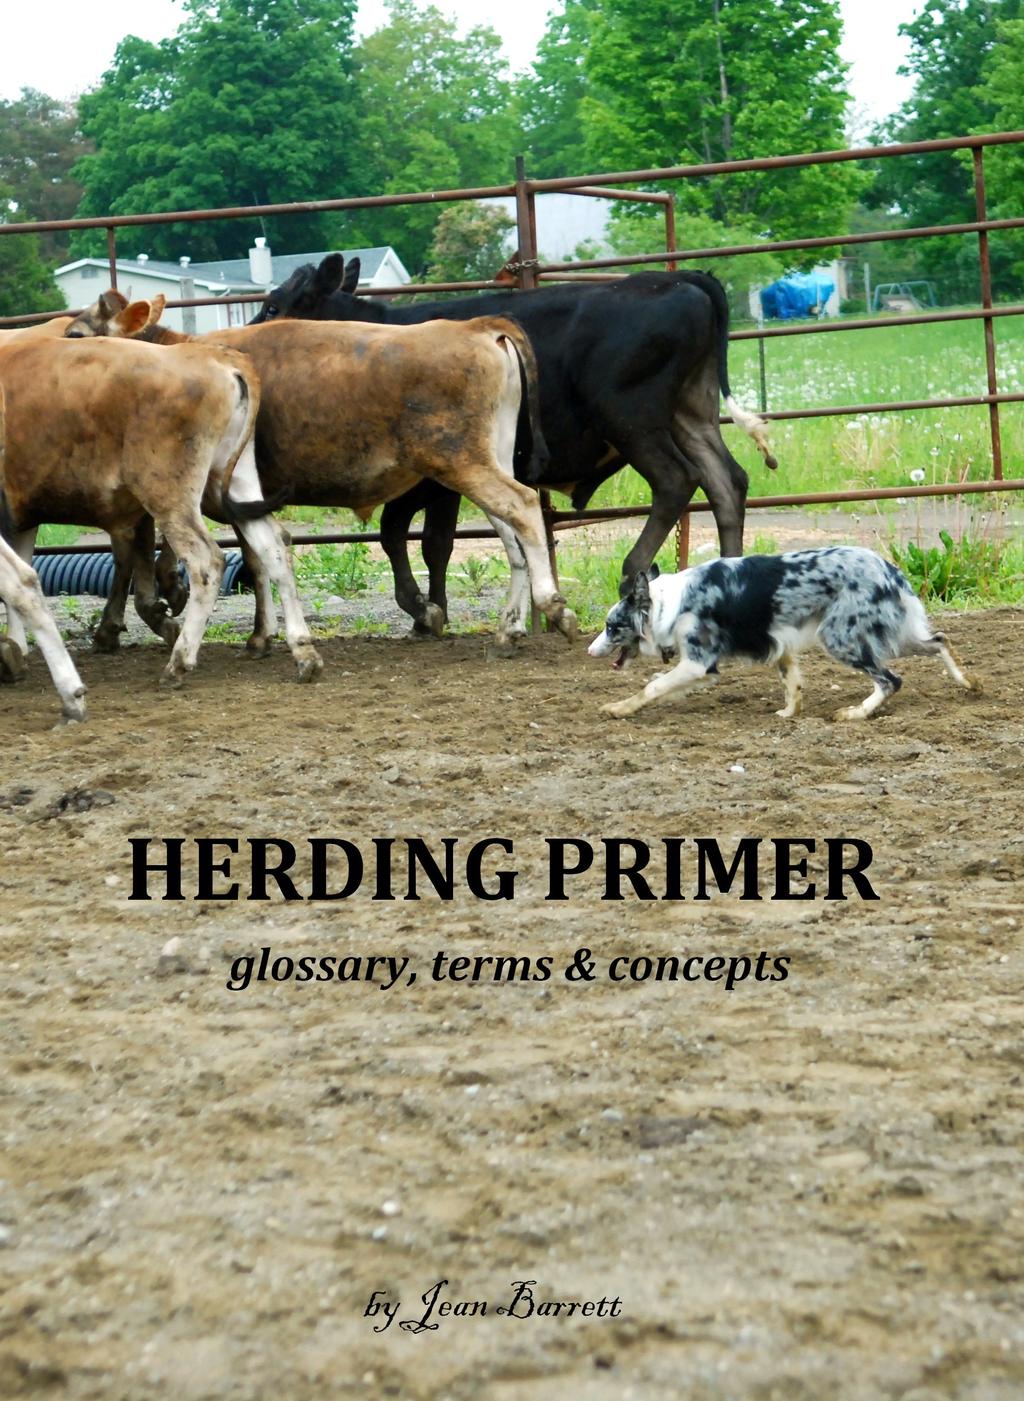 SOLD OUT REORDER FOR FALL HERDING PRIMER - $30 each or if you need it shipped somewhere add $6 postage foreign orders will need to add exact shipping fees. I received your herding primer.